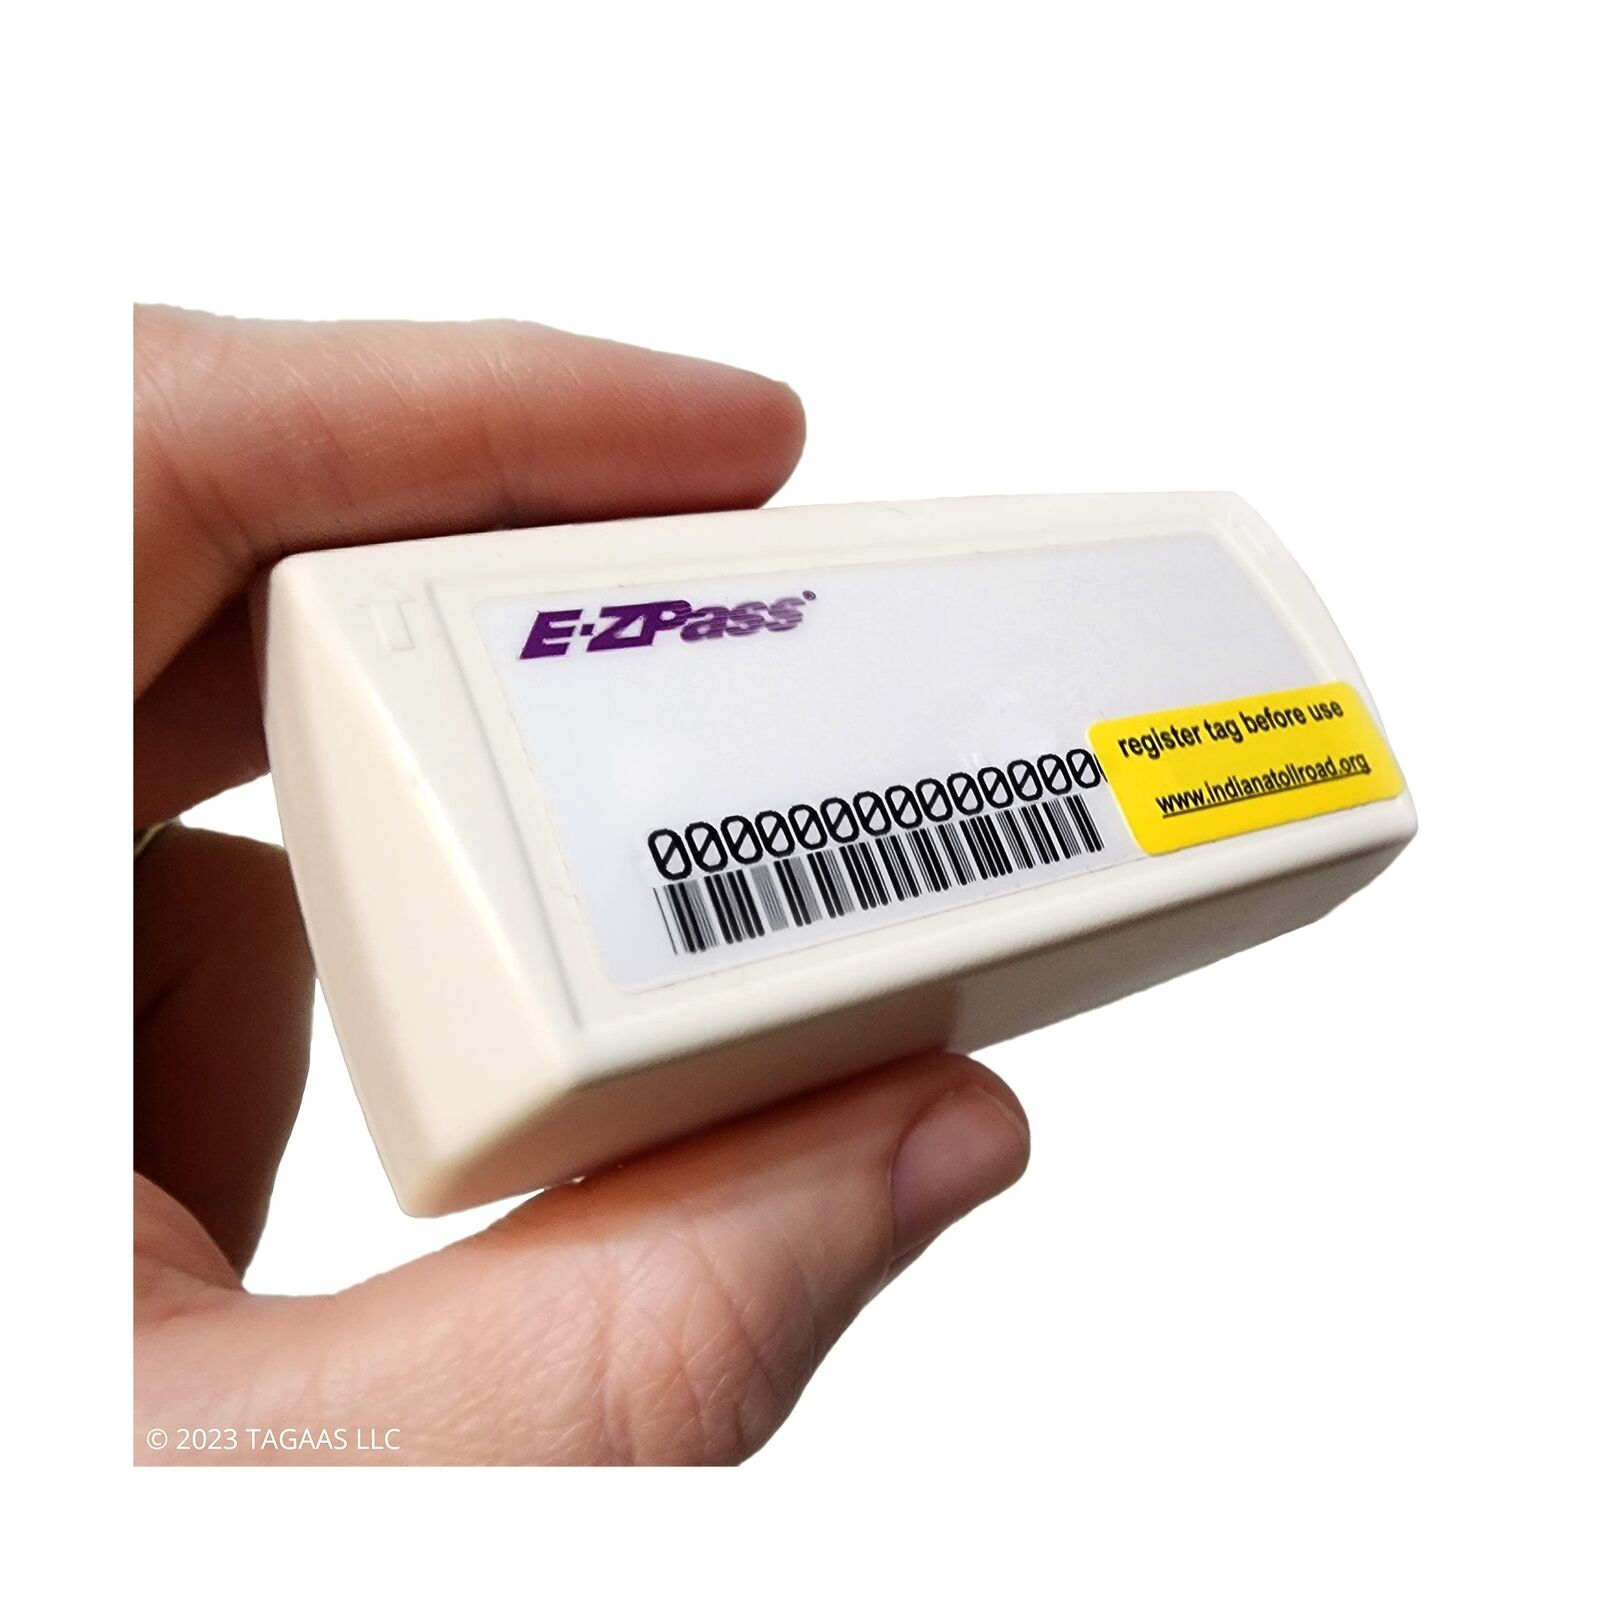 E-ZPass Transponder - Indiana Toll Road (ITRCC) (5-Pack) 5-Pack